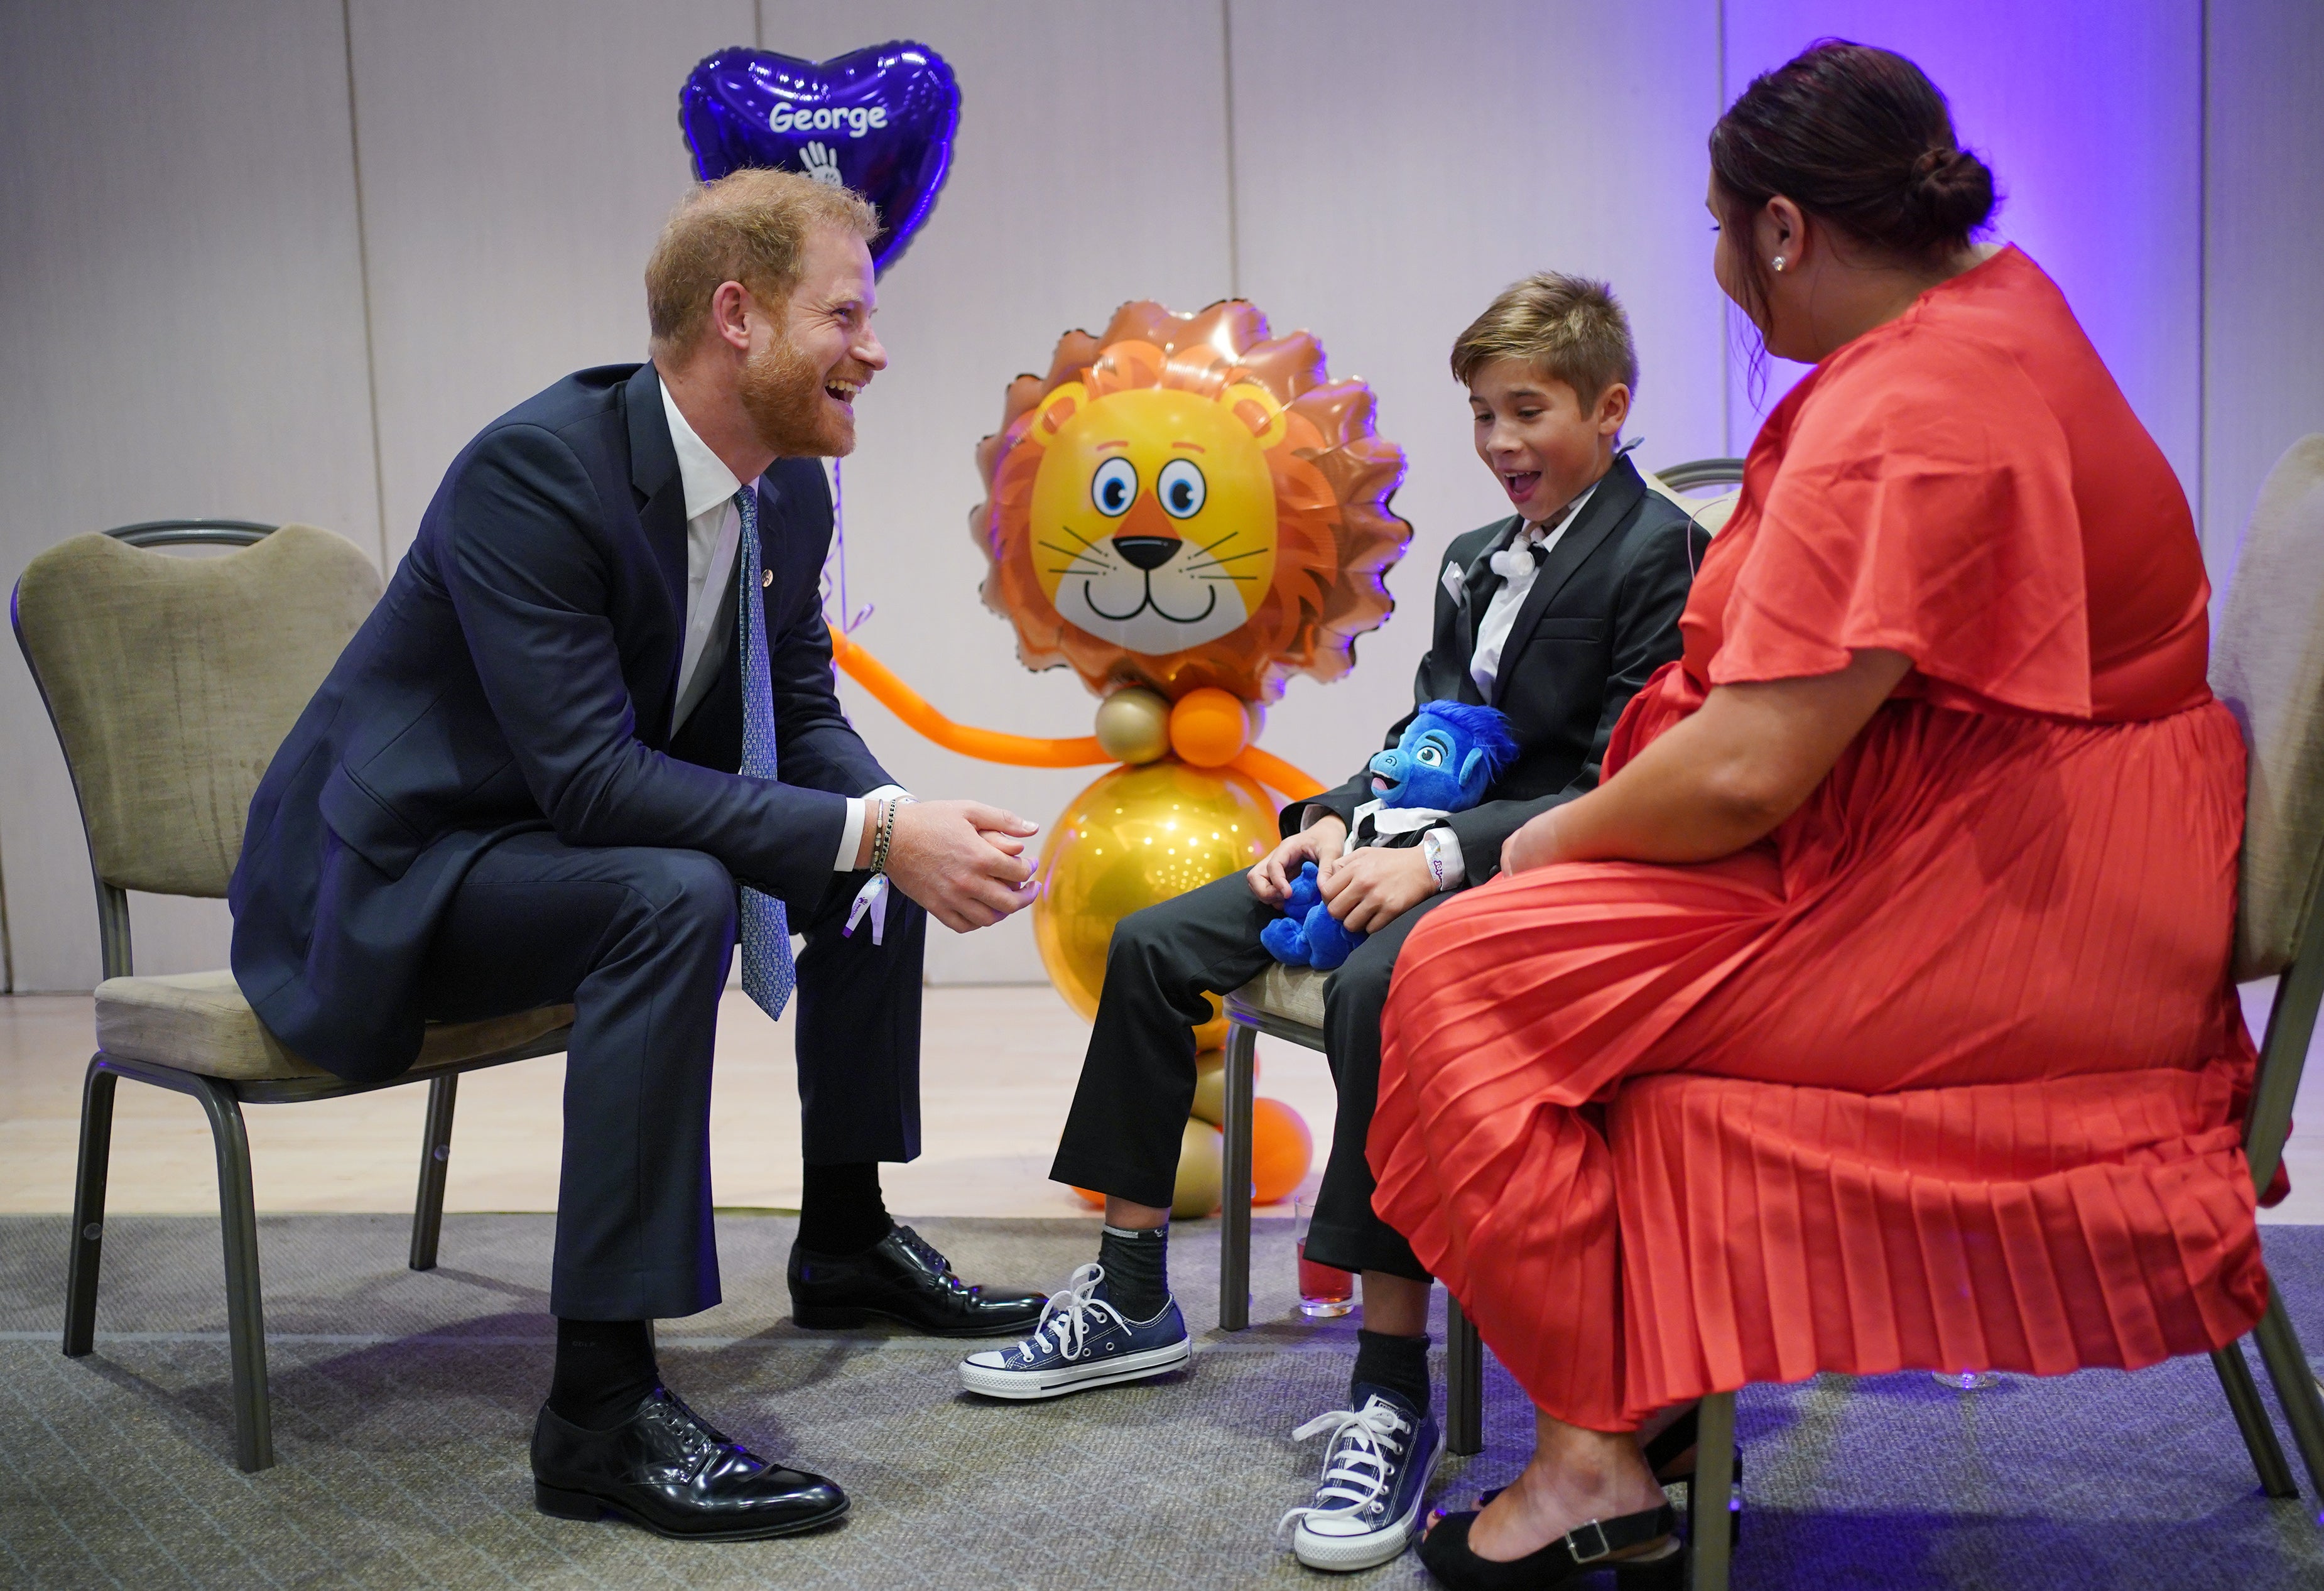 A solo Prince Harry greeted award winner George Hall with a fist-bump at the WellChild Awards